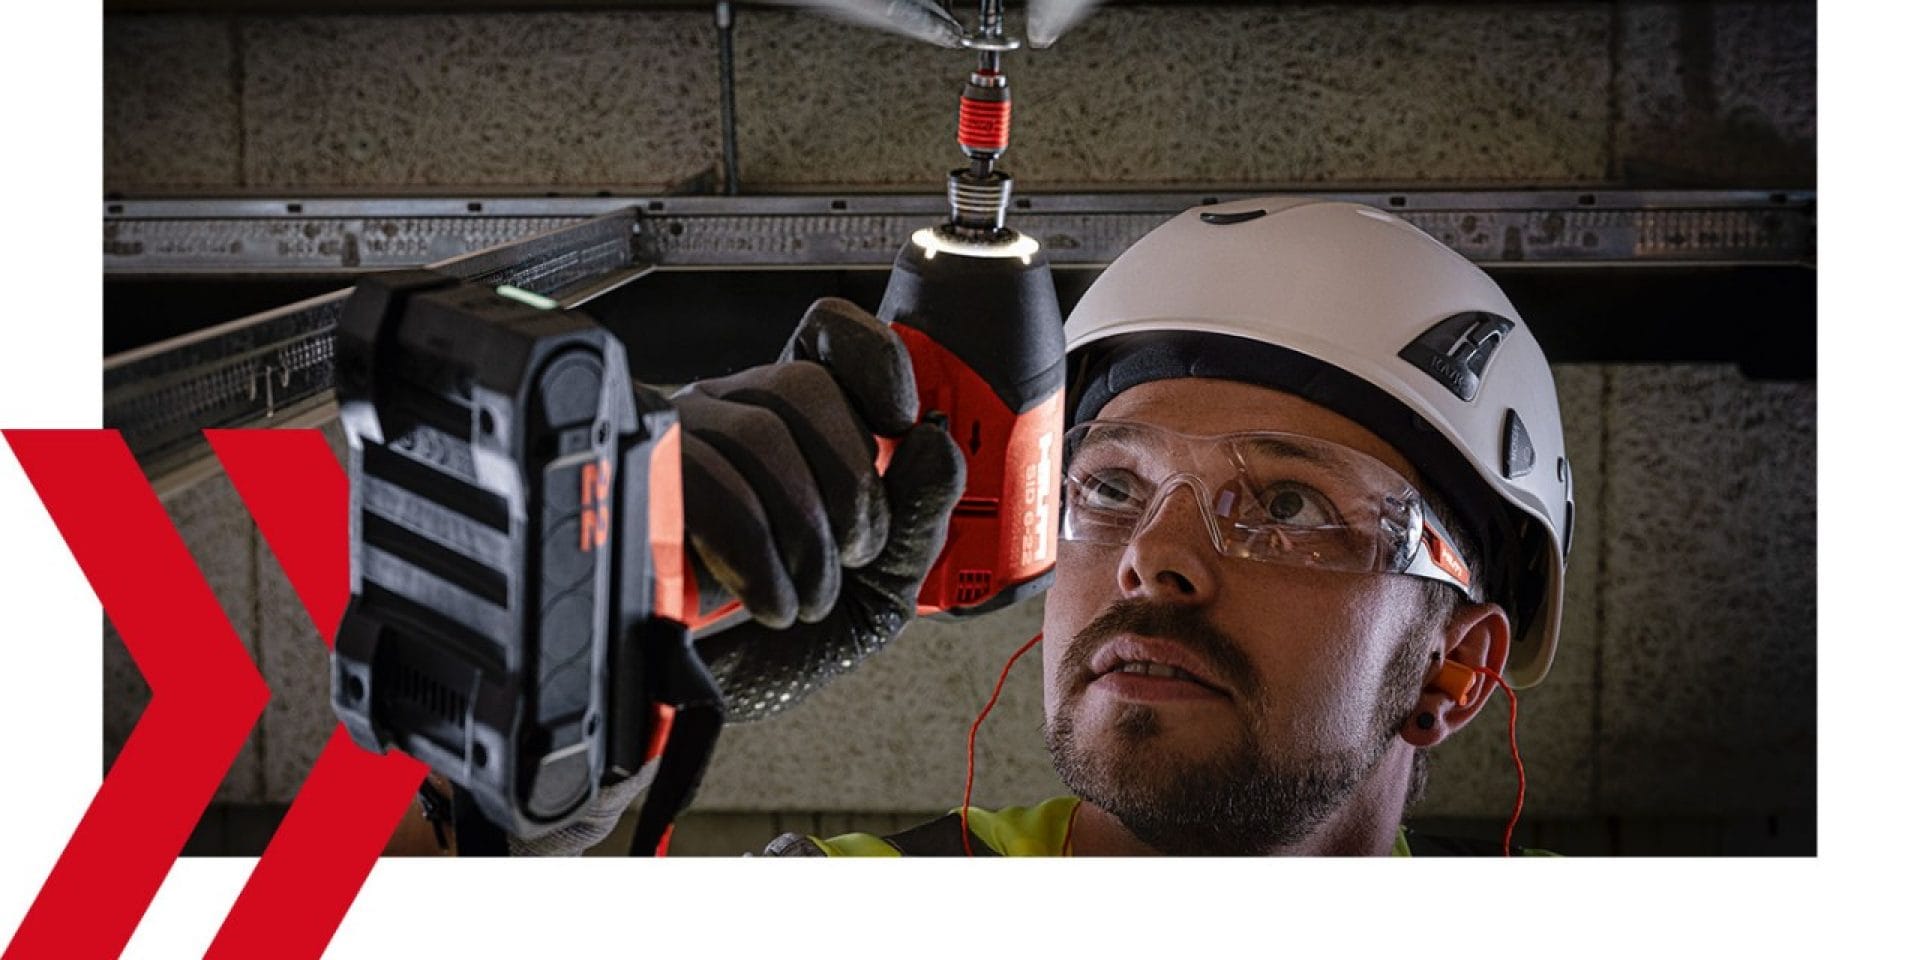 A person is doing overhead work with the Hilti Nuron SID 6-22 cordless impact driver and a B22-55 Nuron battery.